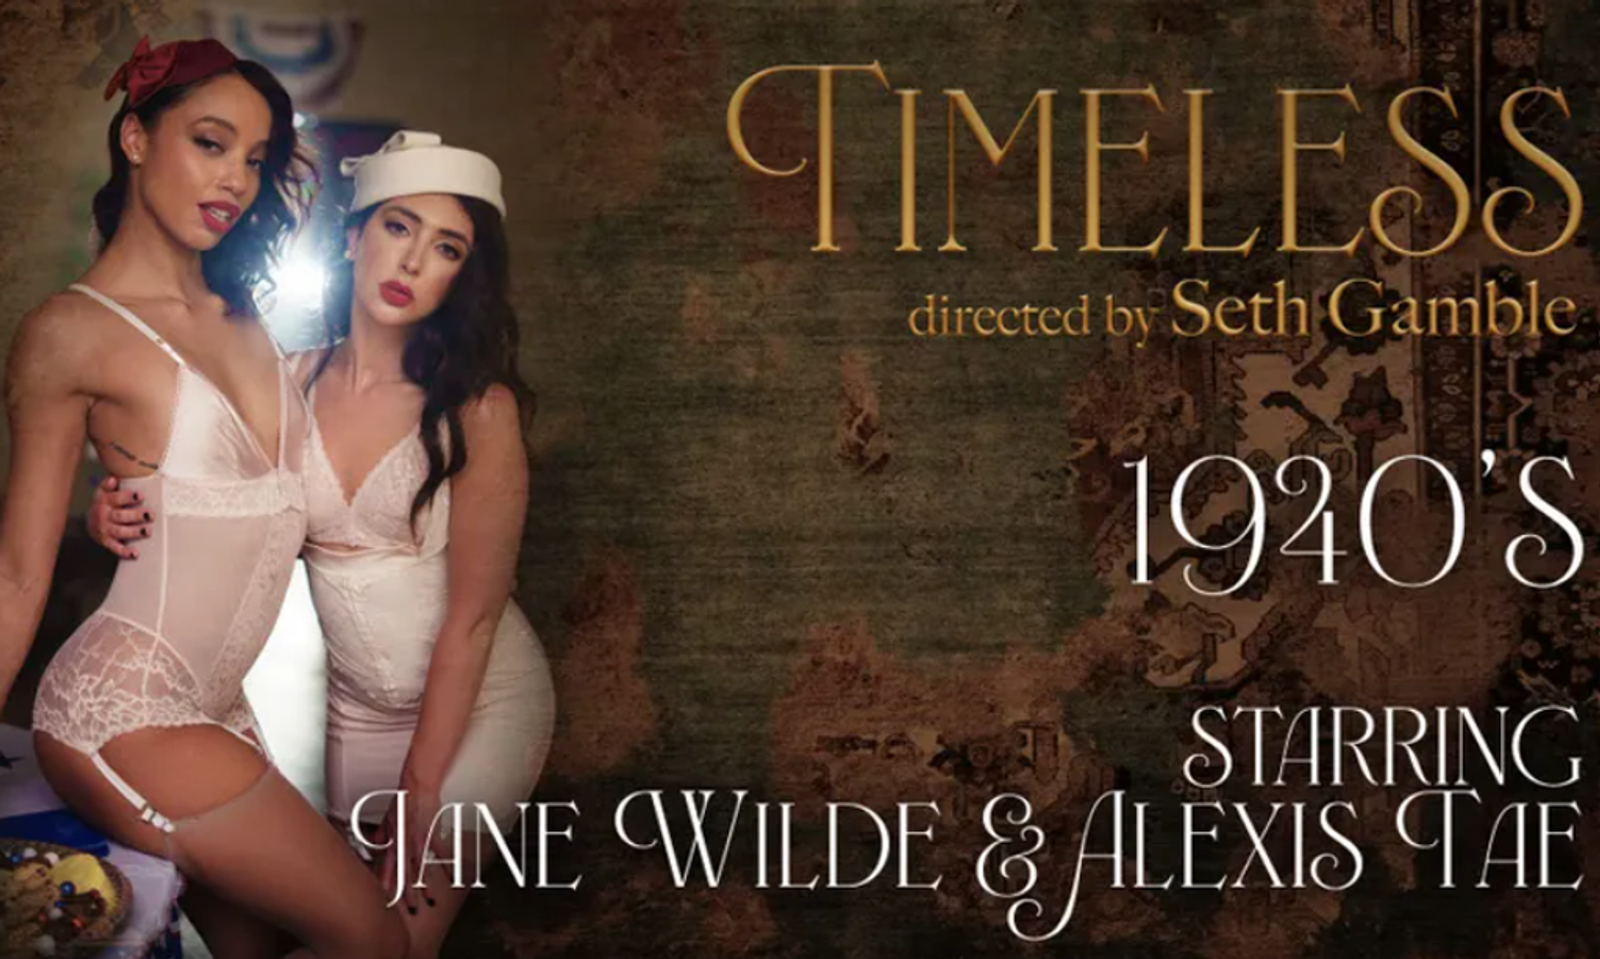 Jane Wilde, Alexis Tae Star in Ep 3 of Seth Gamble's 'Timeless'